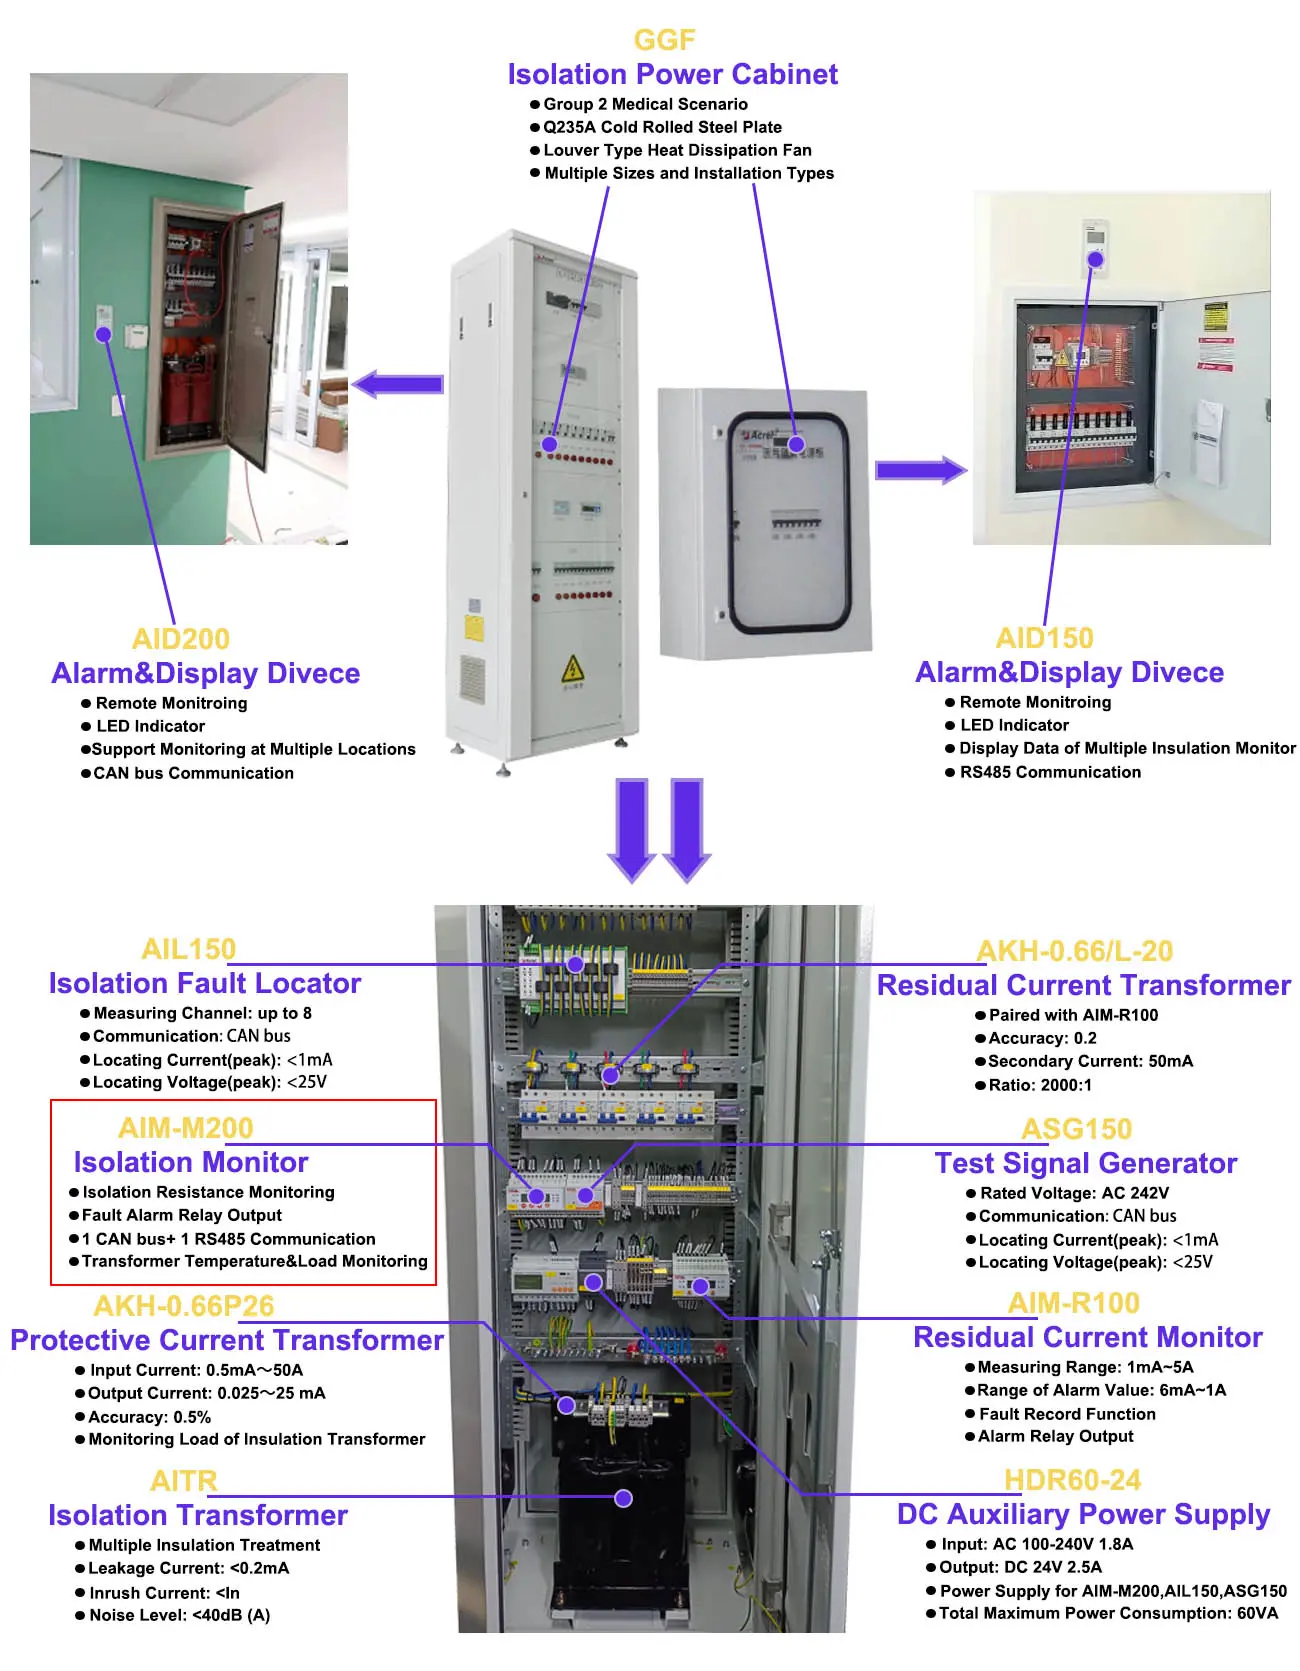 Practical application of AIM-M200 Hospital Insulation Monitoring Device in hospital IT power supply system